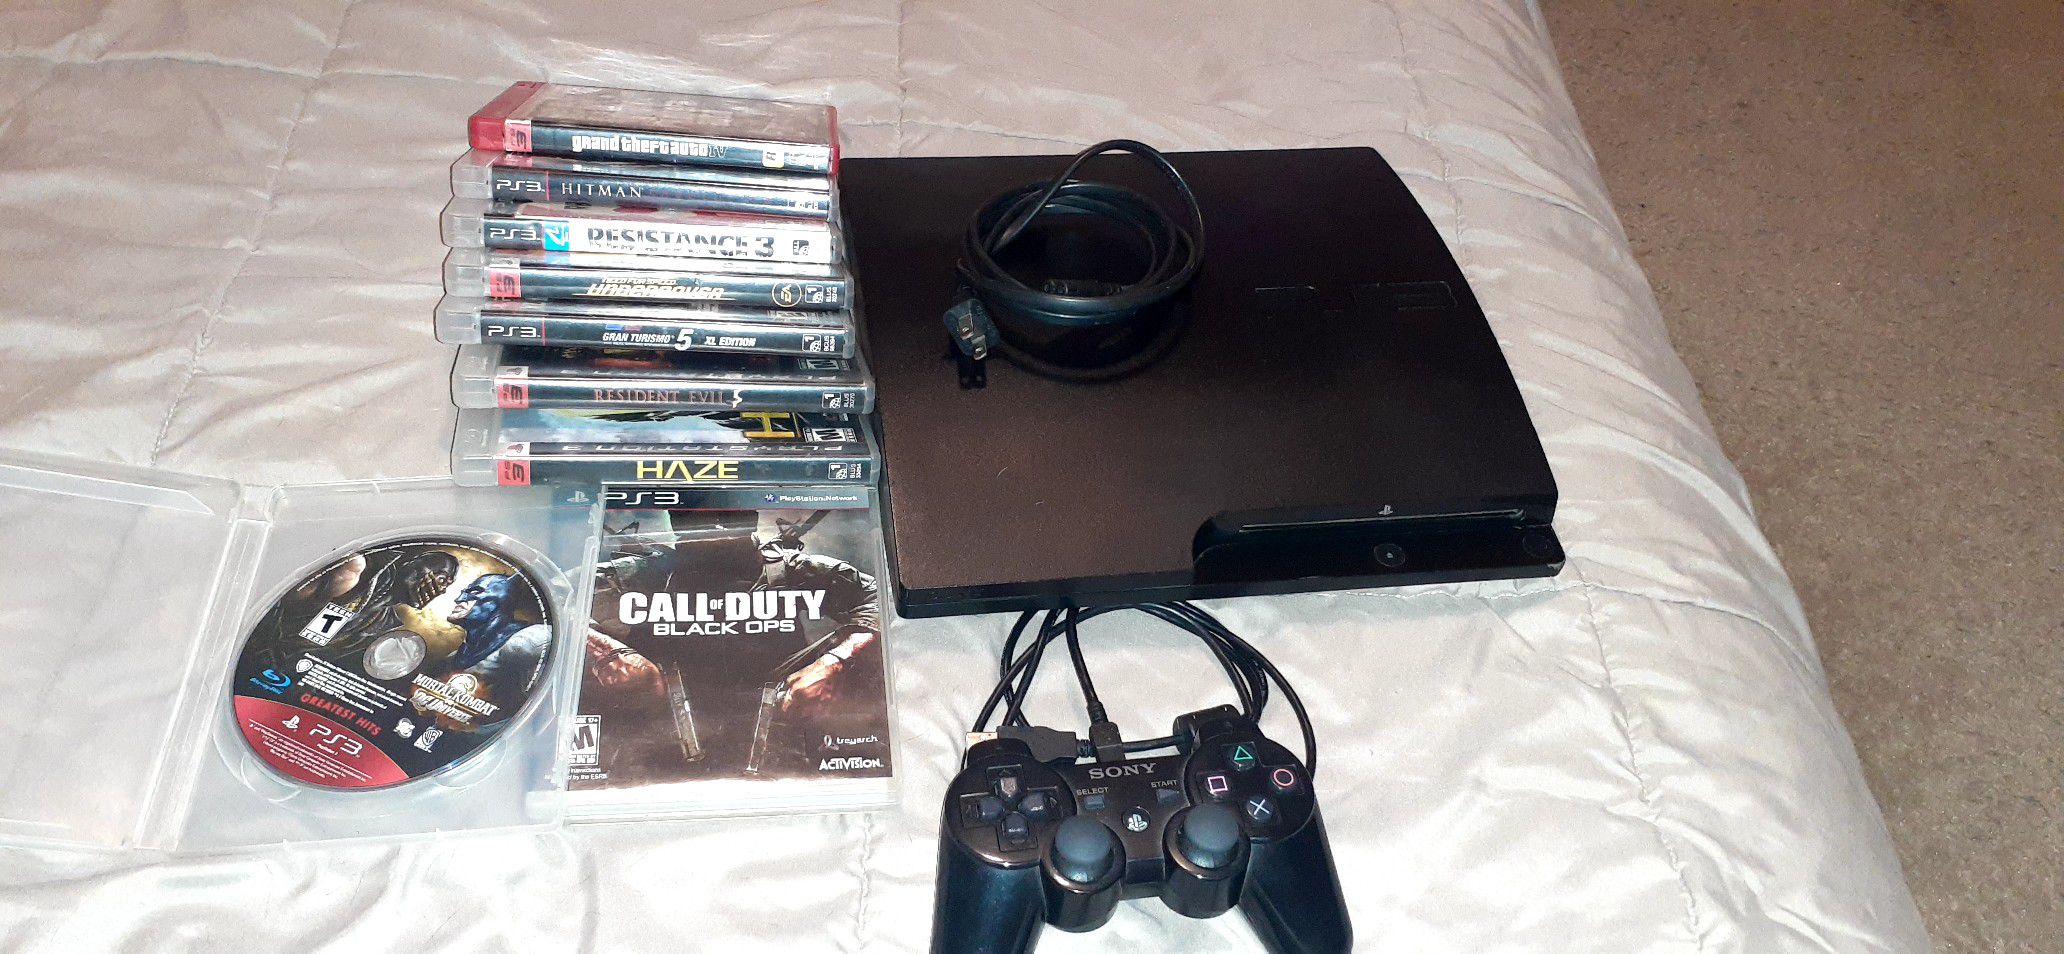 Ps3 and games (bundle)